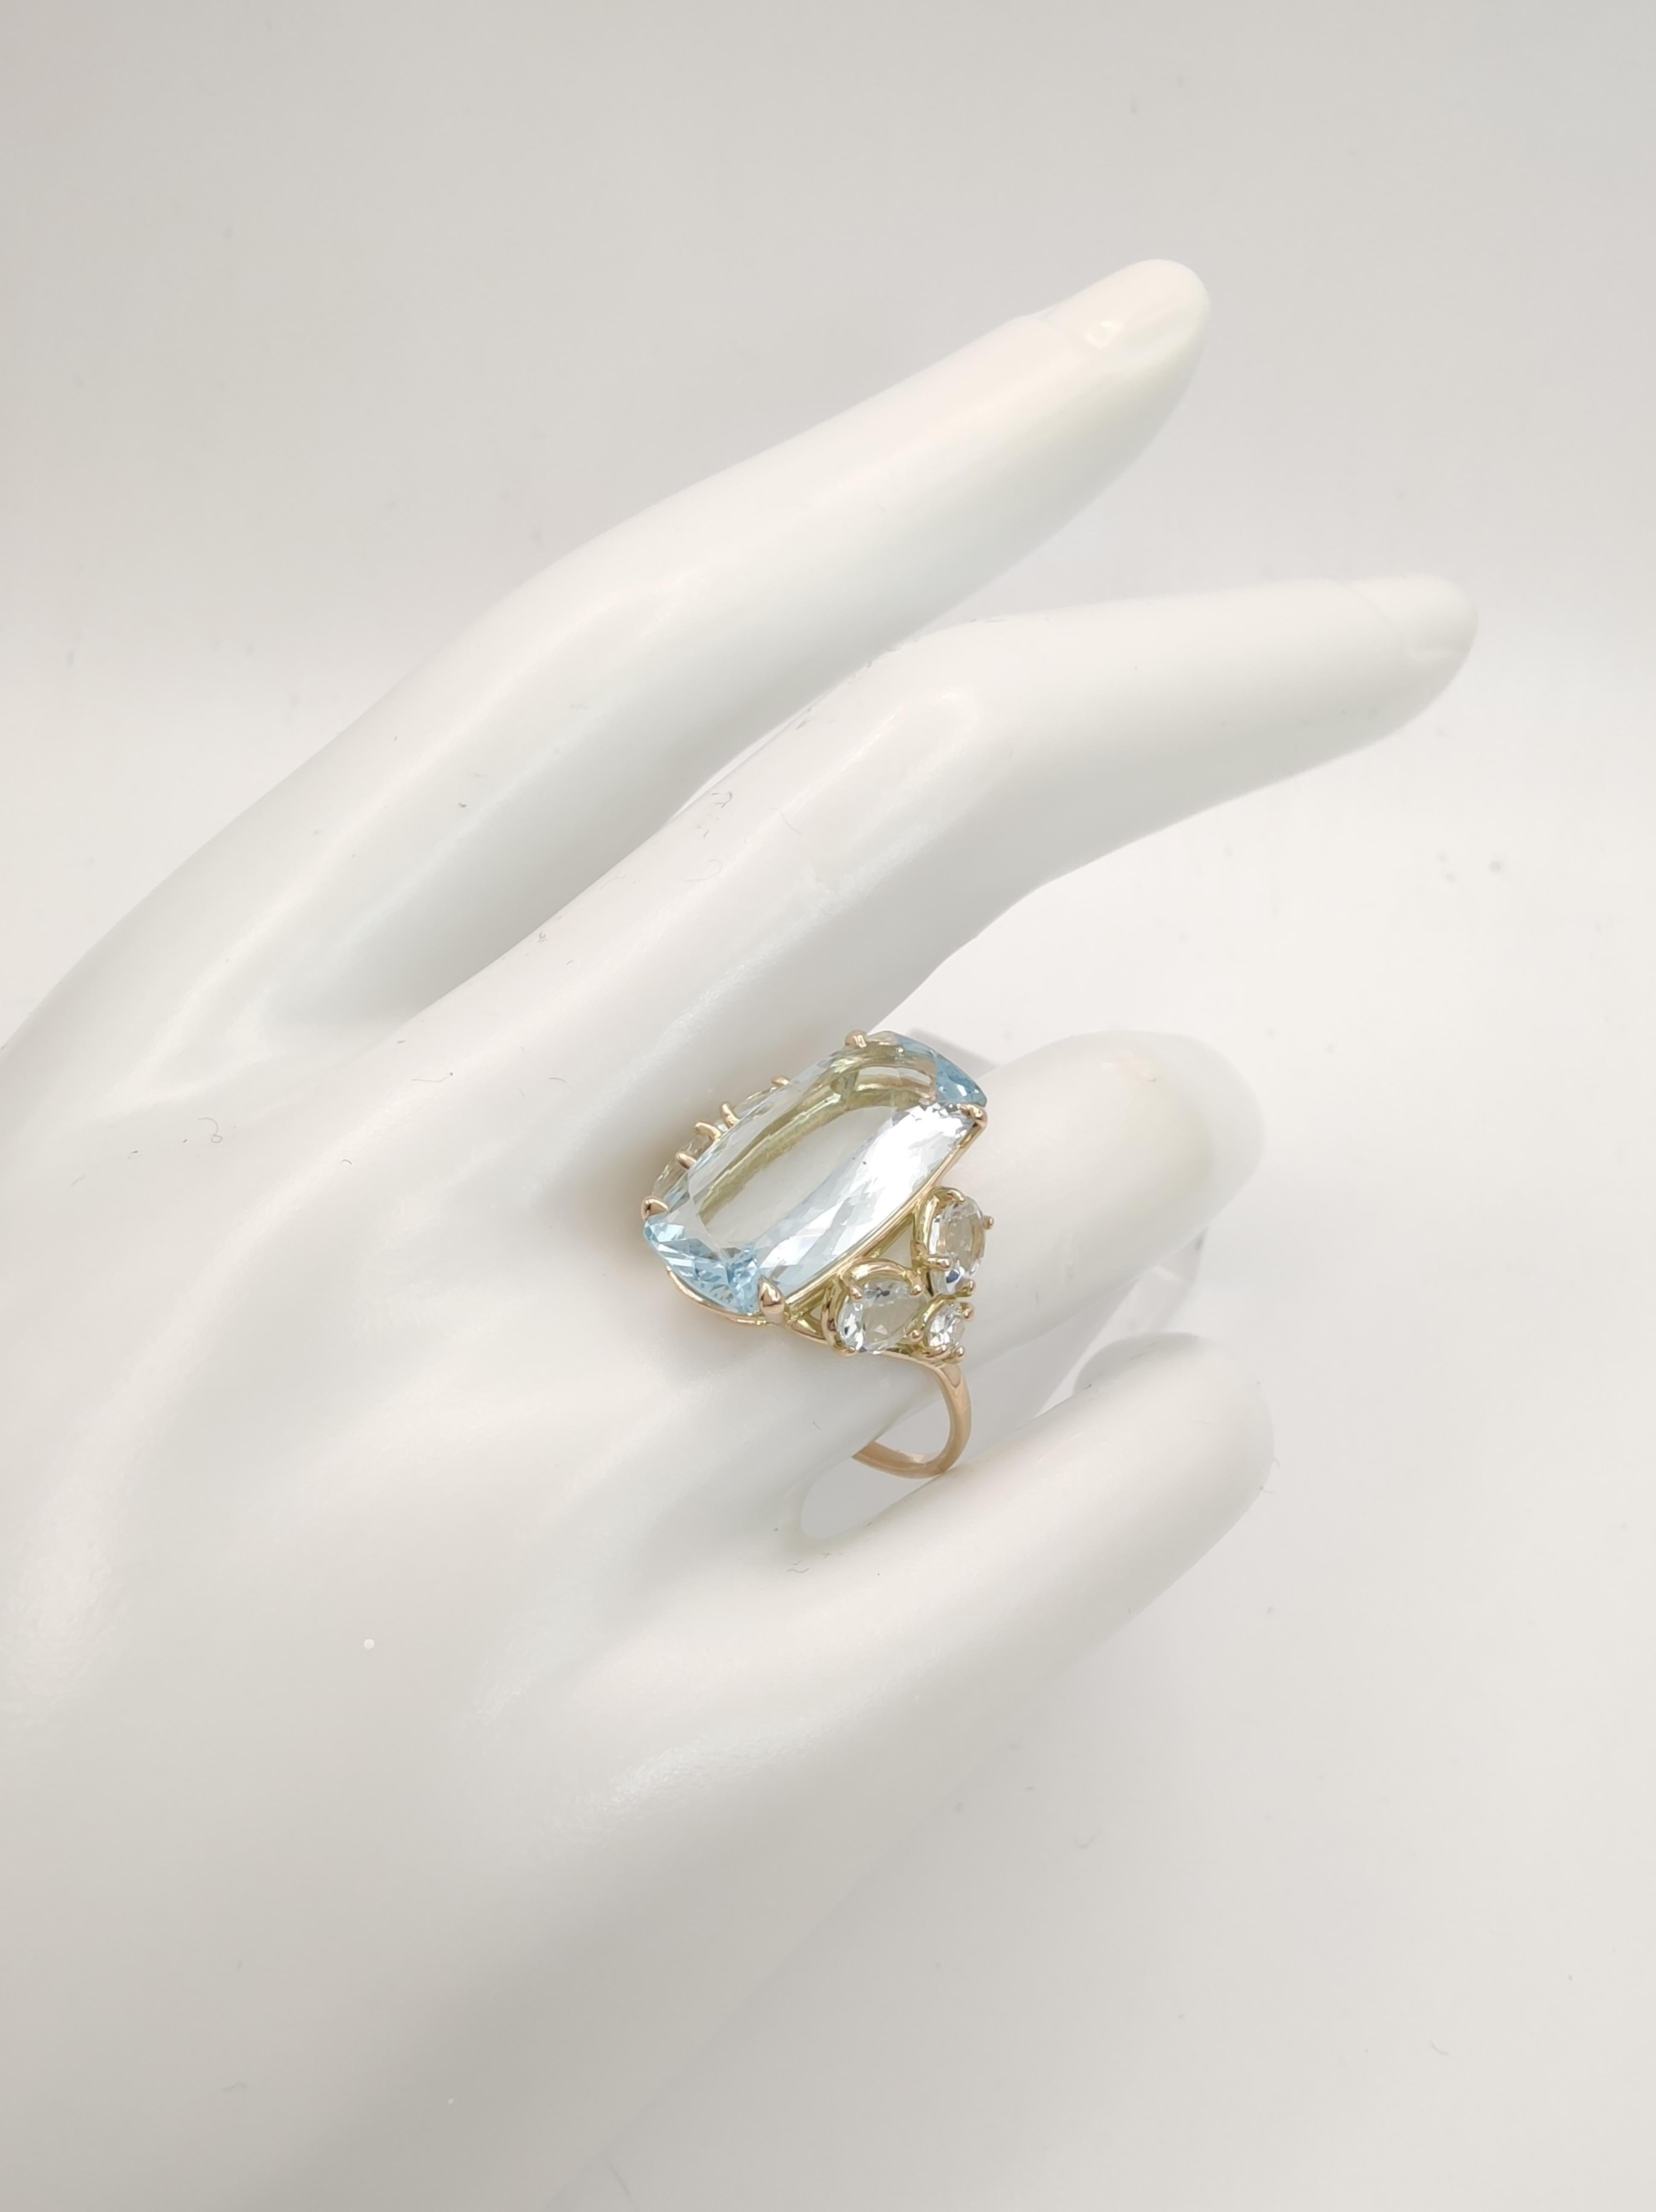 Discover a handmade, sculptural masterpiece a unique ring perfect for engagement, promise, wedding, or a special Christmas gift for that extraordinary woman in your life. Featuring a stunning central Aquamarine gem framed by exquisite side